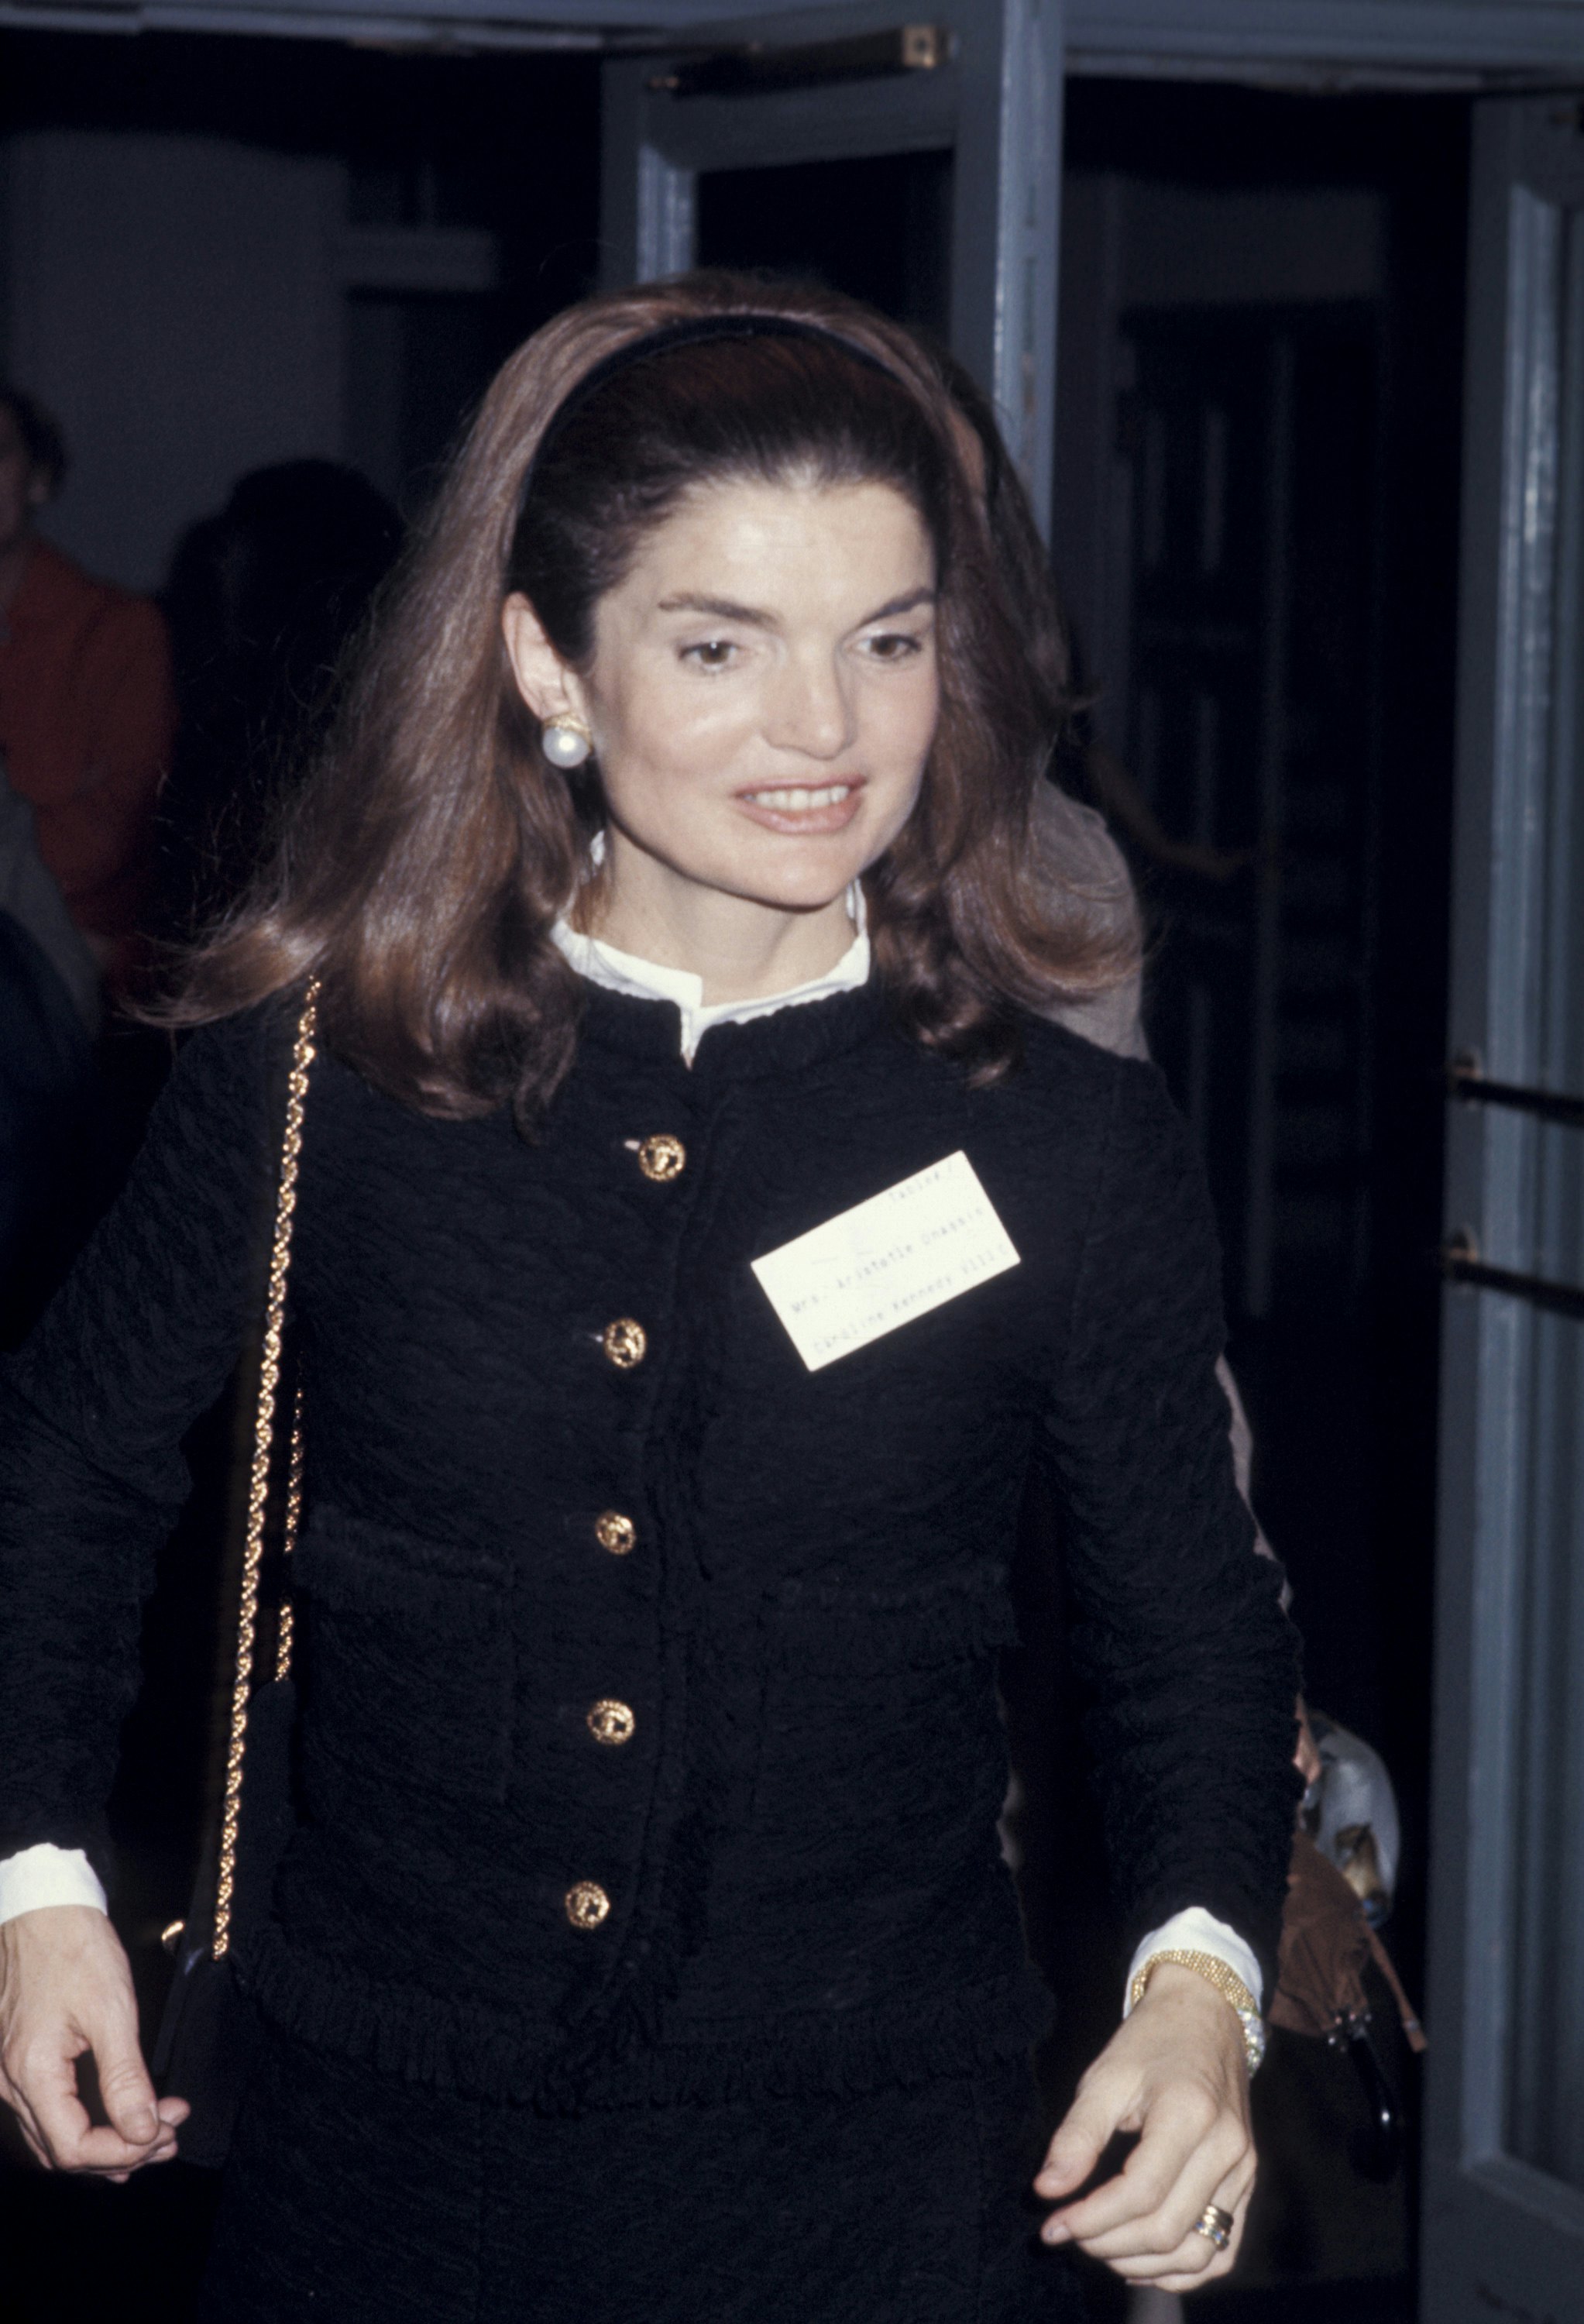 Jackie Kennedy Onassiss skincare routine has been uncovered  Dazed